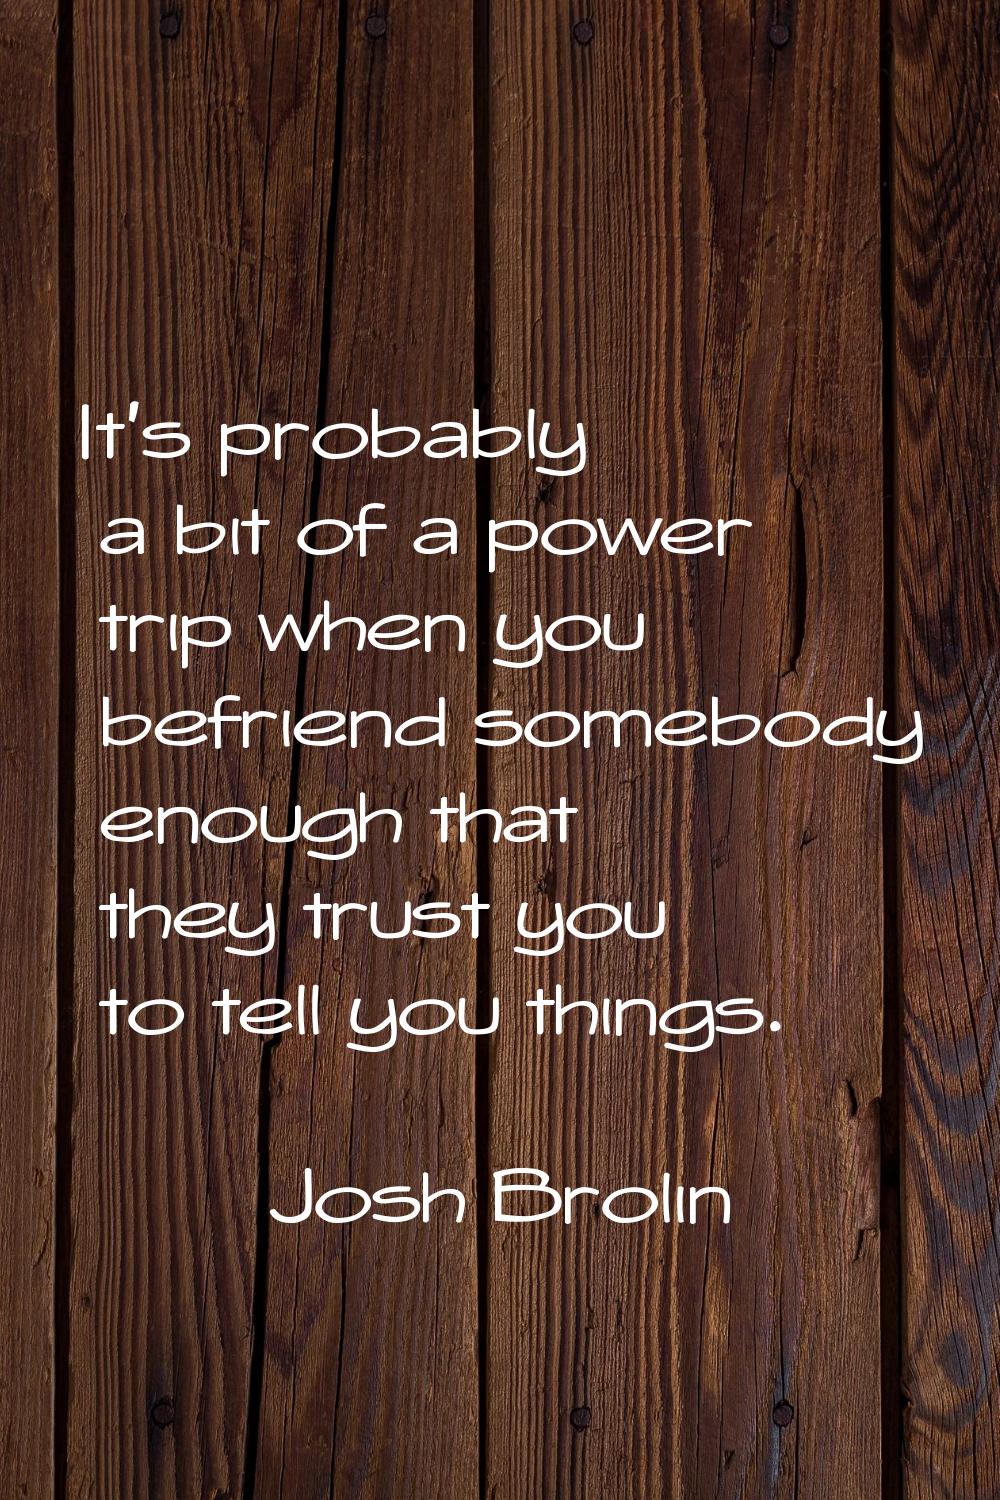 It's probably a bit of a power trip when you befriend somebody enough that they trust you to tell y